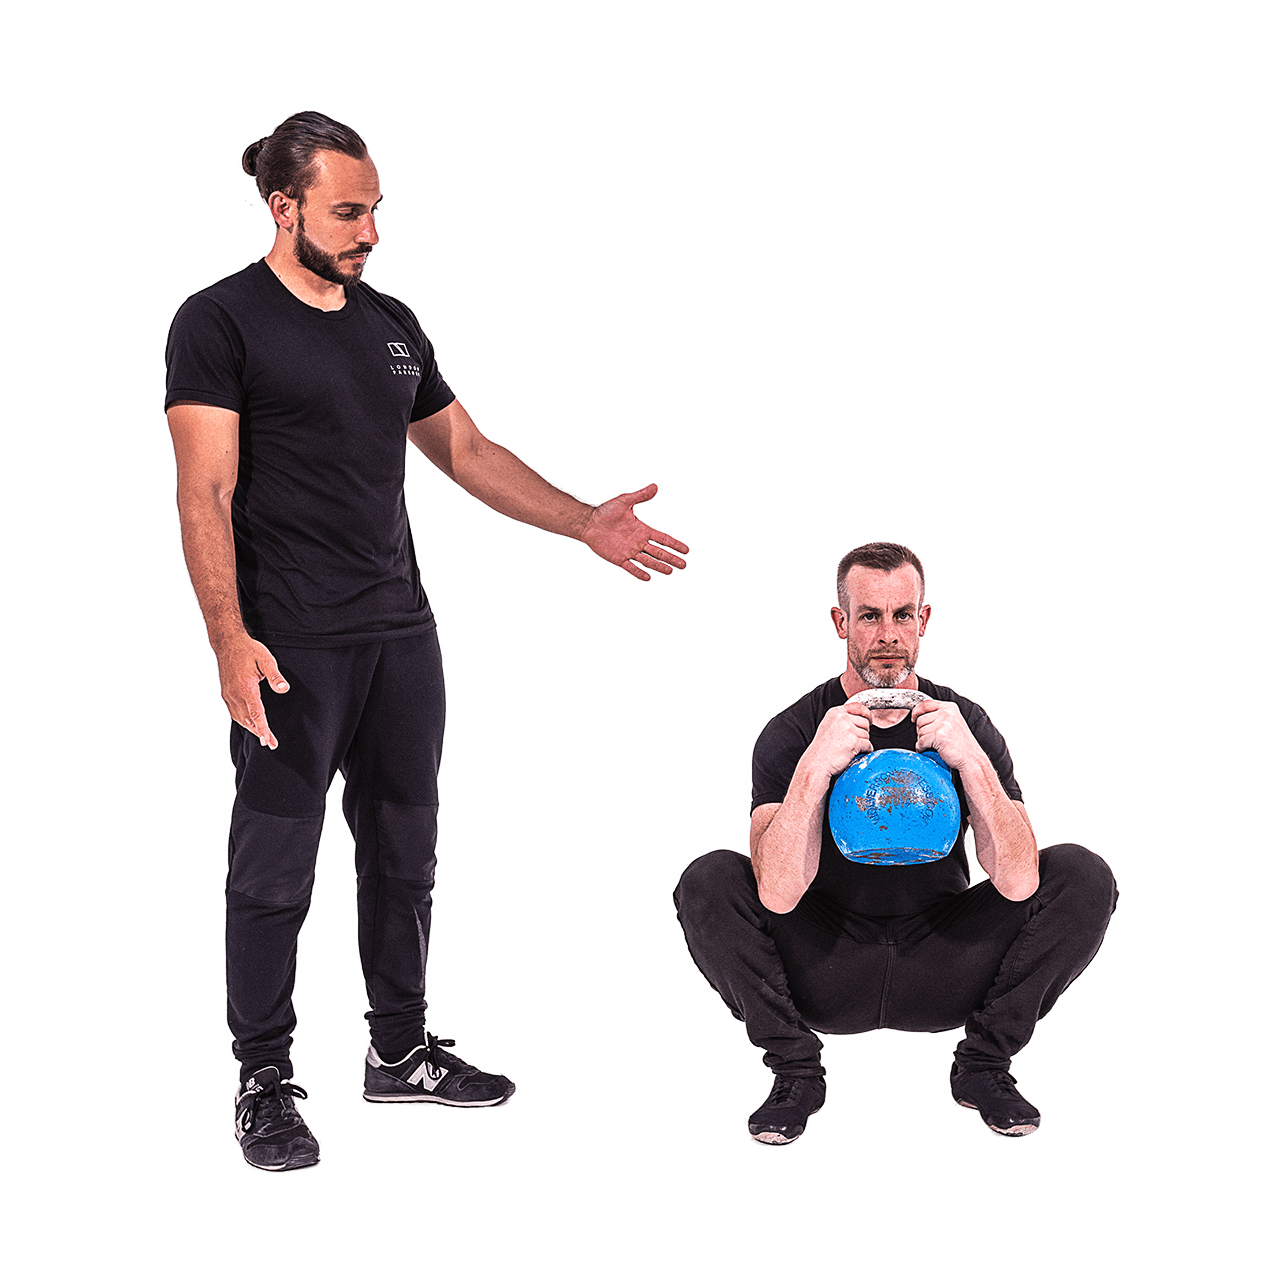 Kevin teaches Andy a kettlebell squat.